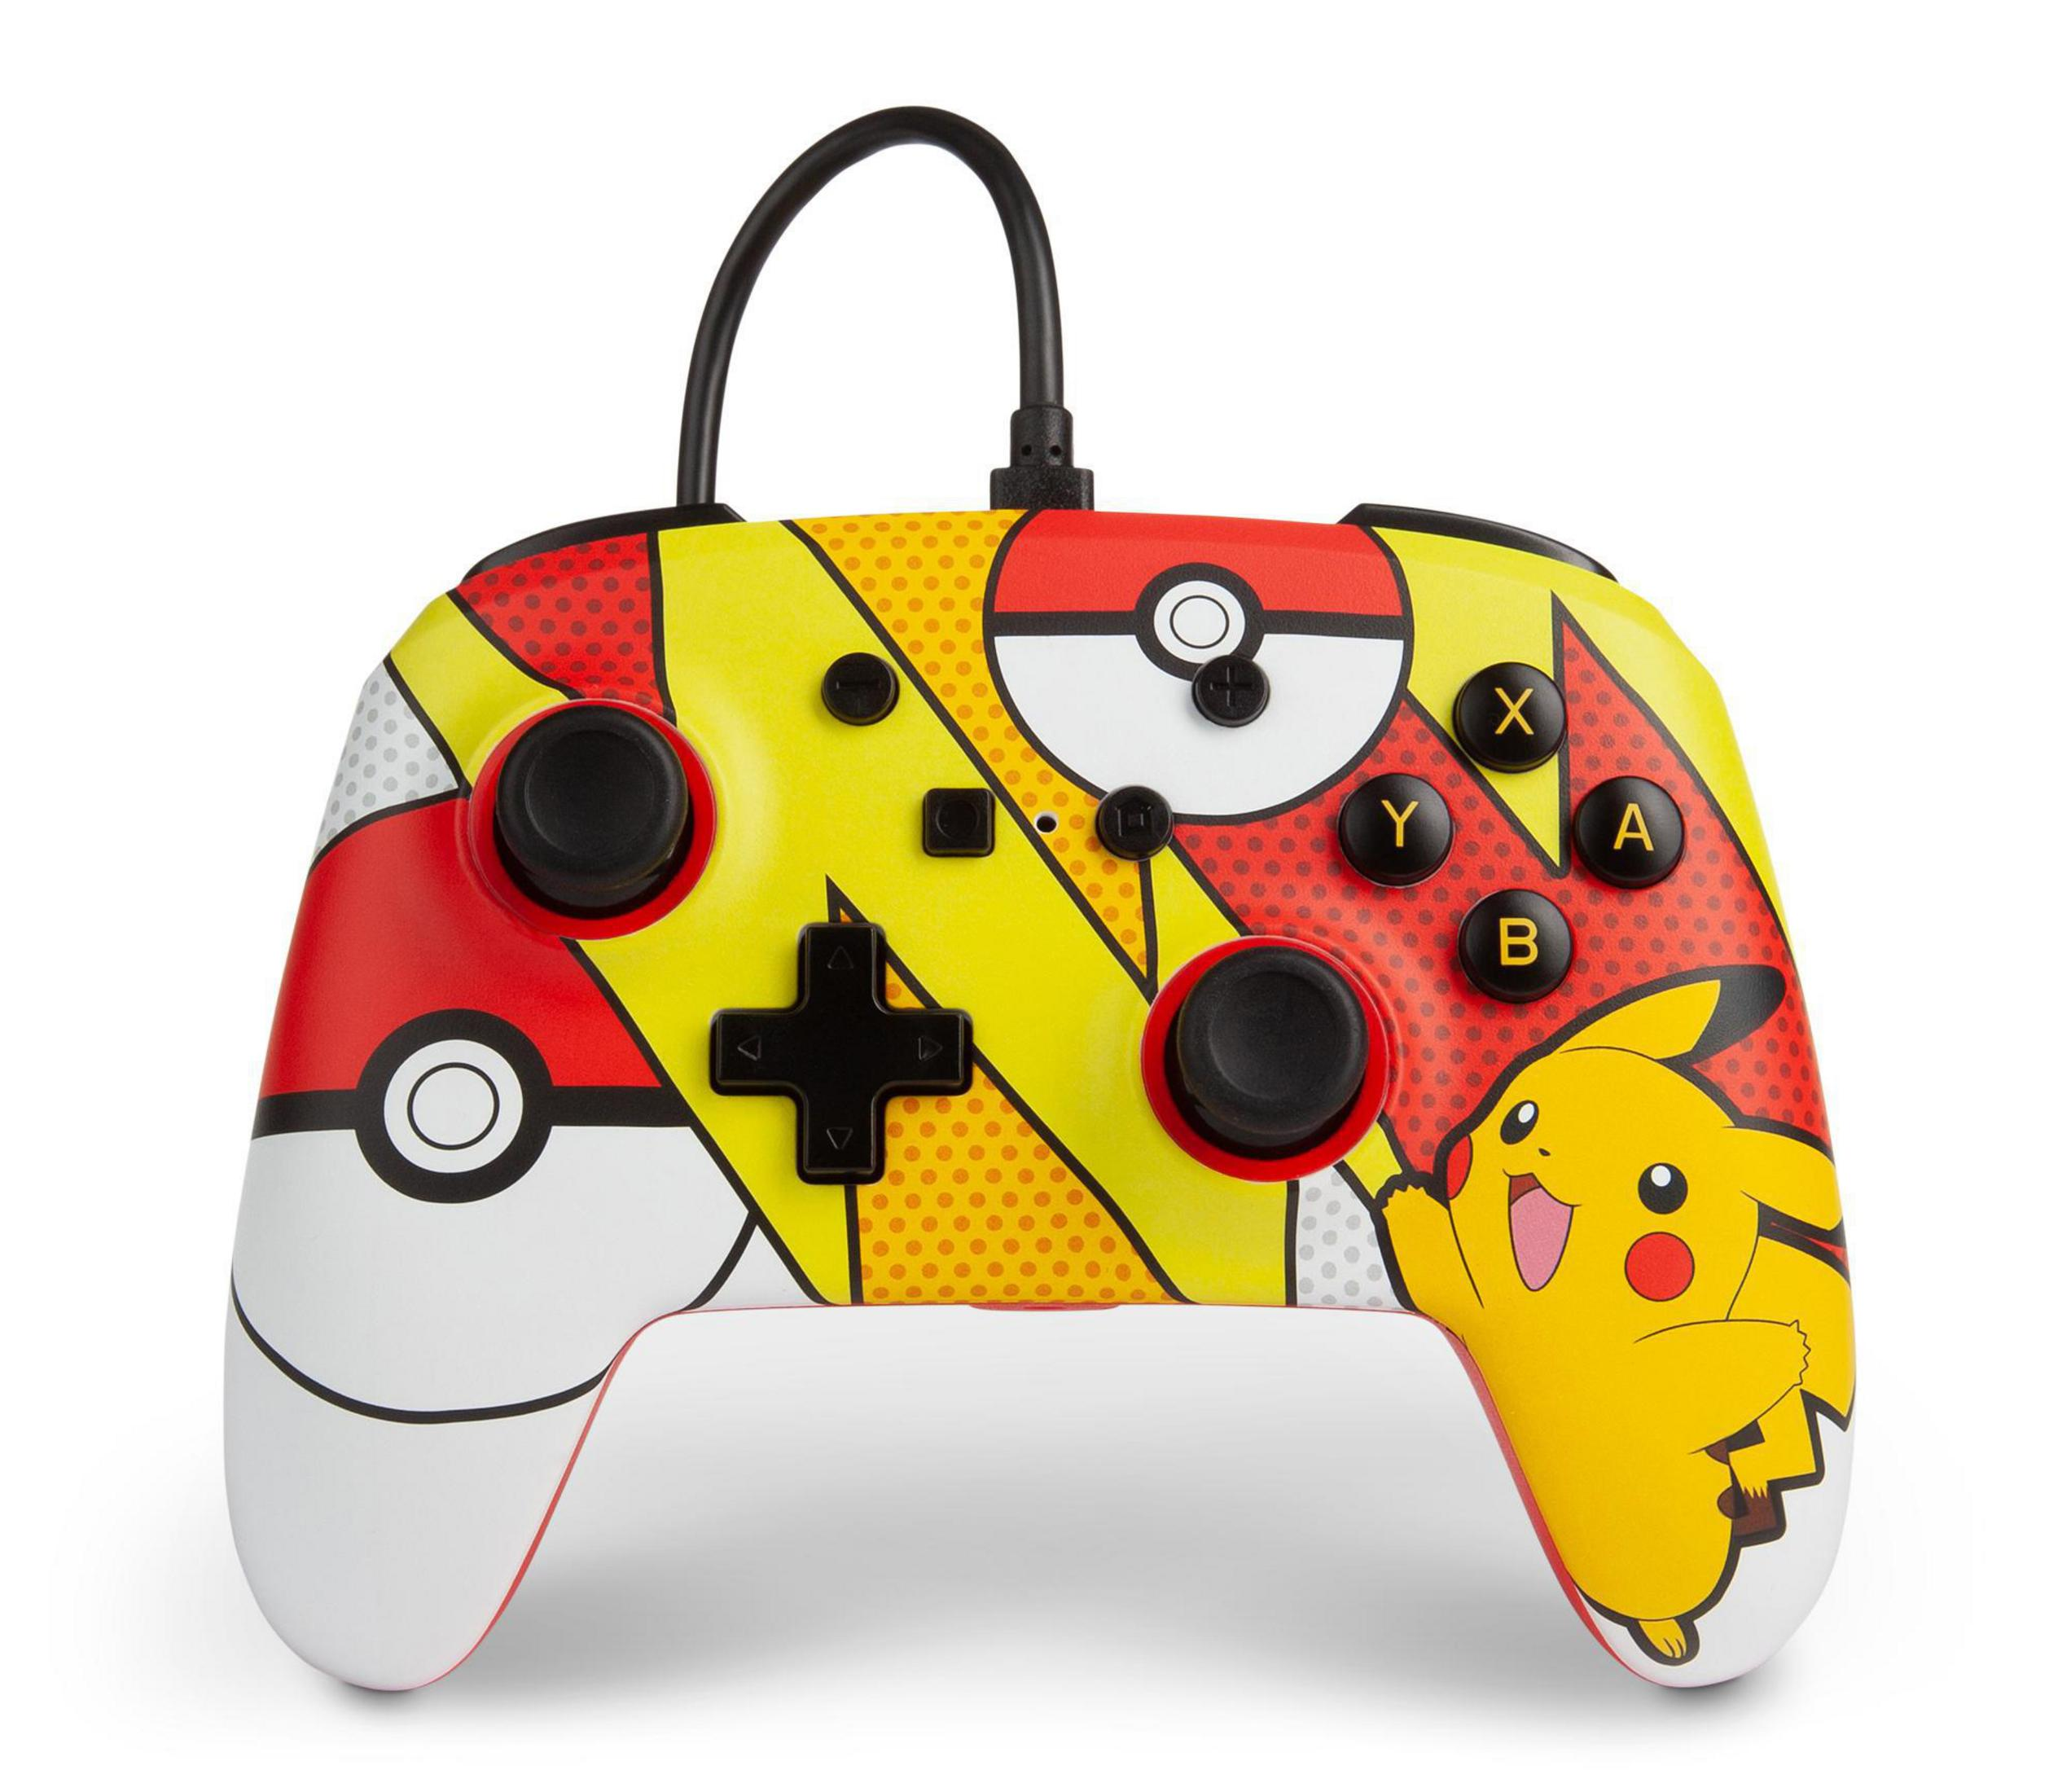 POWER A PA1518905-01 NSW WIRED PIKACHU POPART CONTROLLER Rot/Gelb Controller